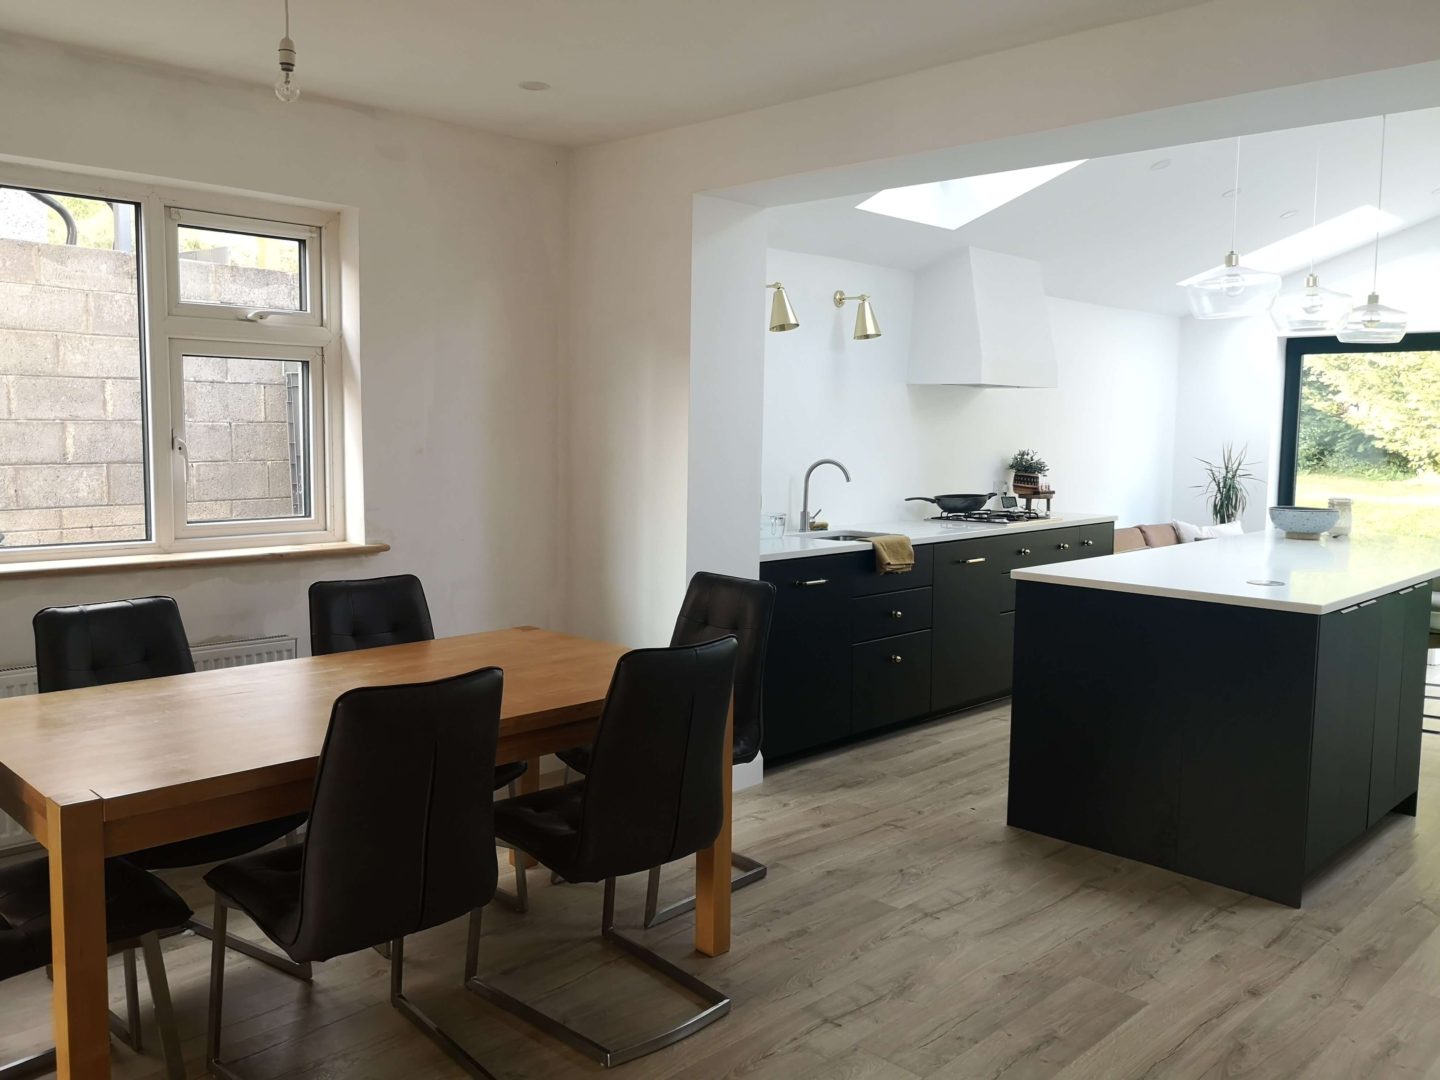 A dining area next to an open plan kitchen with black cabinets.